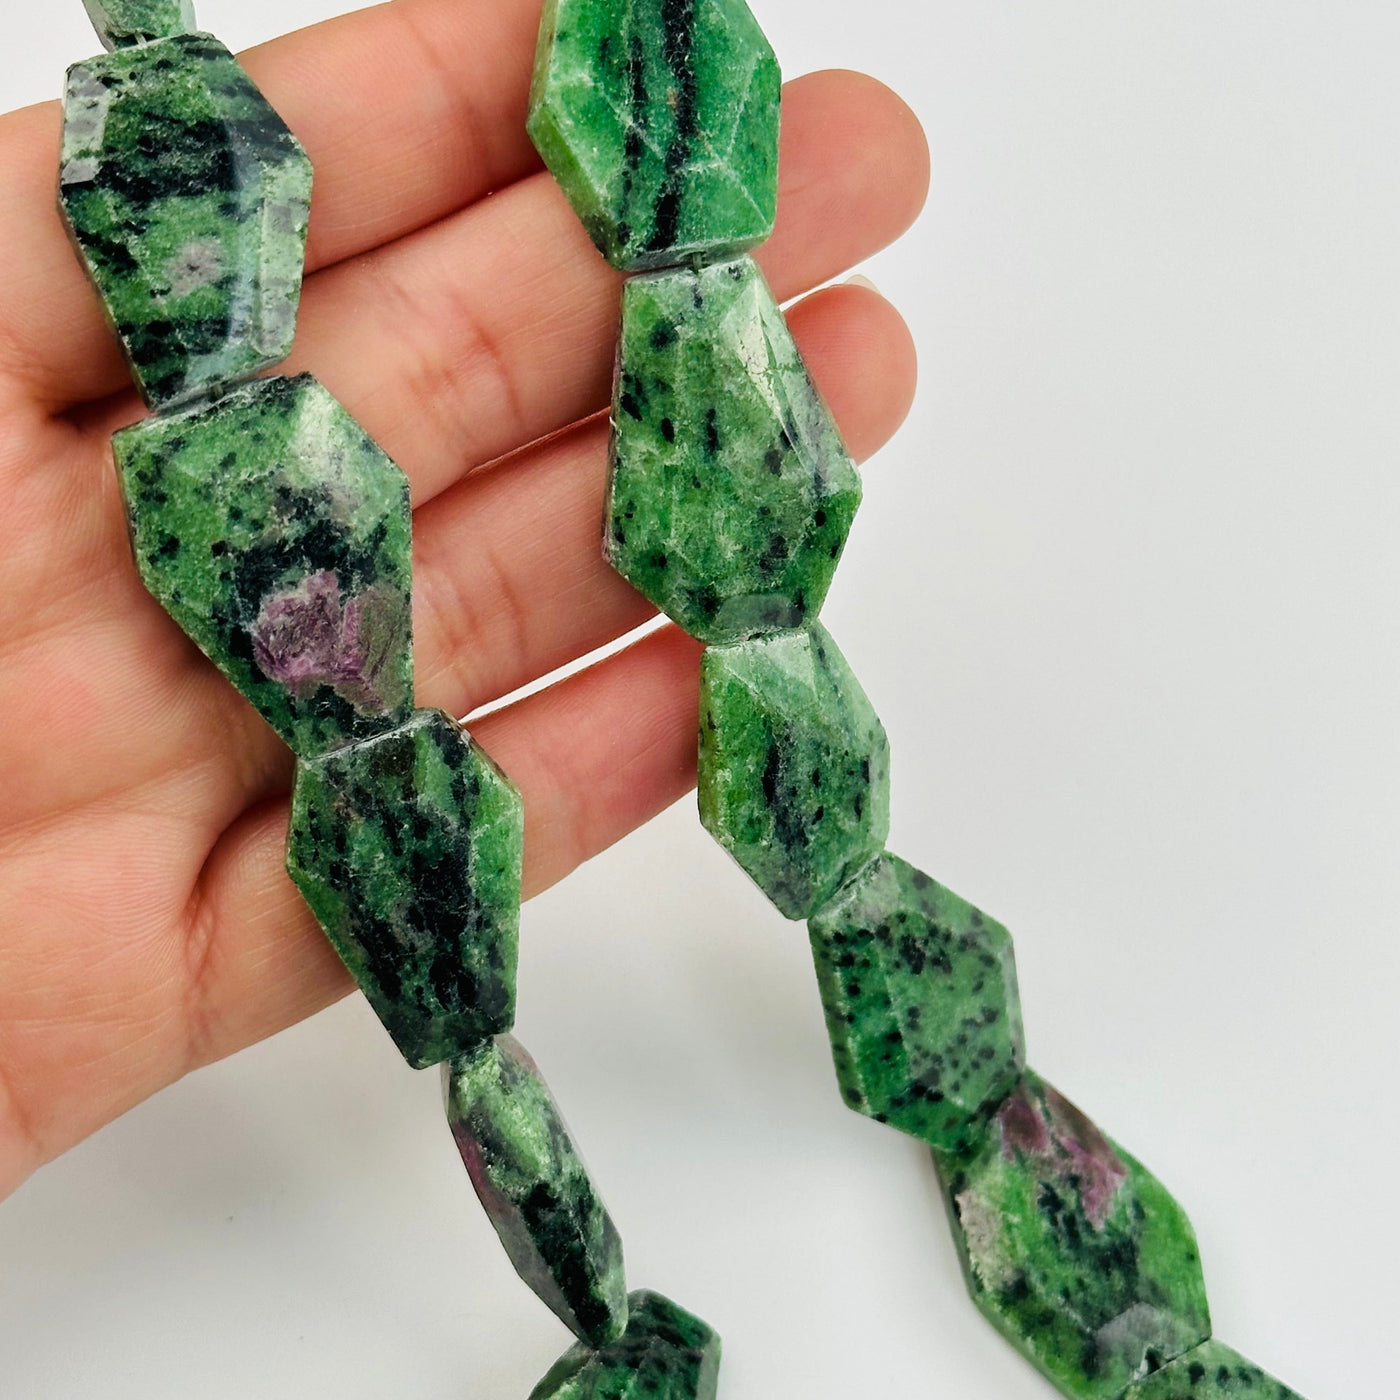 Ruby Zoisite Crystal Bead - 1 full strand in hand for size reference 